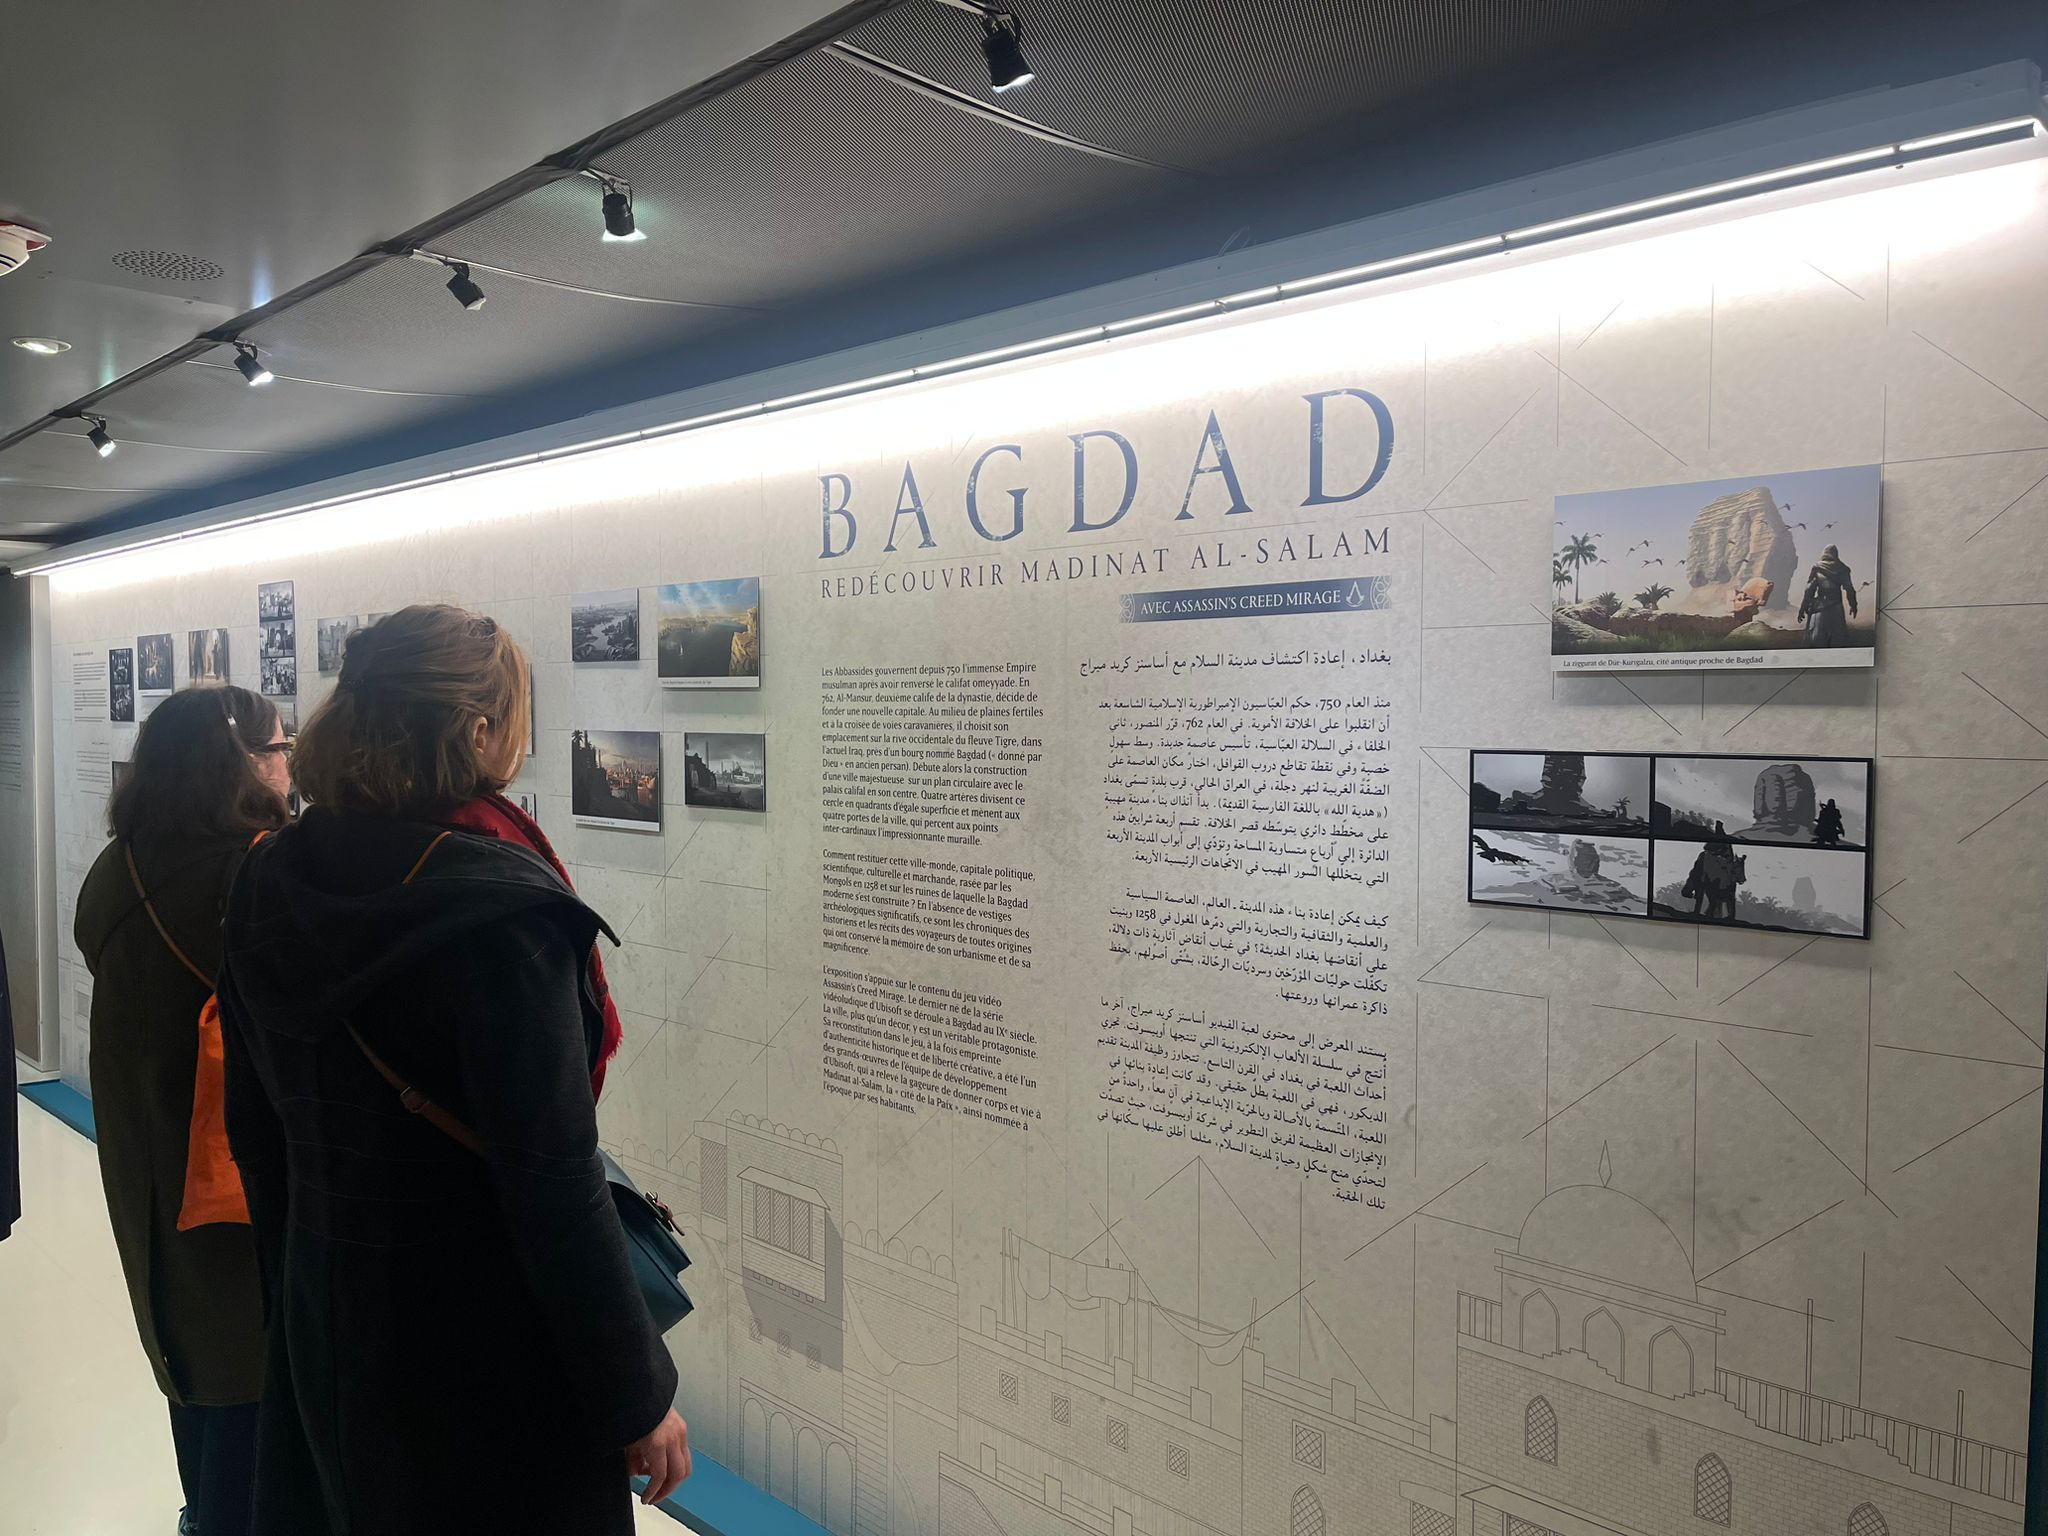 The entry of the exhibition "Baghdad: Rediscover Madinat al-Salam, with Assassin's Creed Mirage" in partnership with Ubisoft at the Arab World Institute in Paris, February 27, 2024. Credits: Sara Trabi